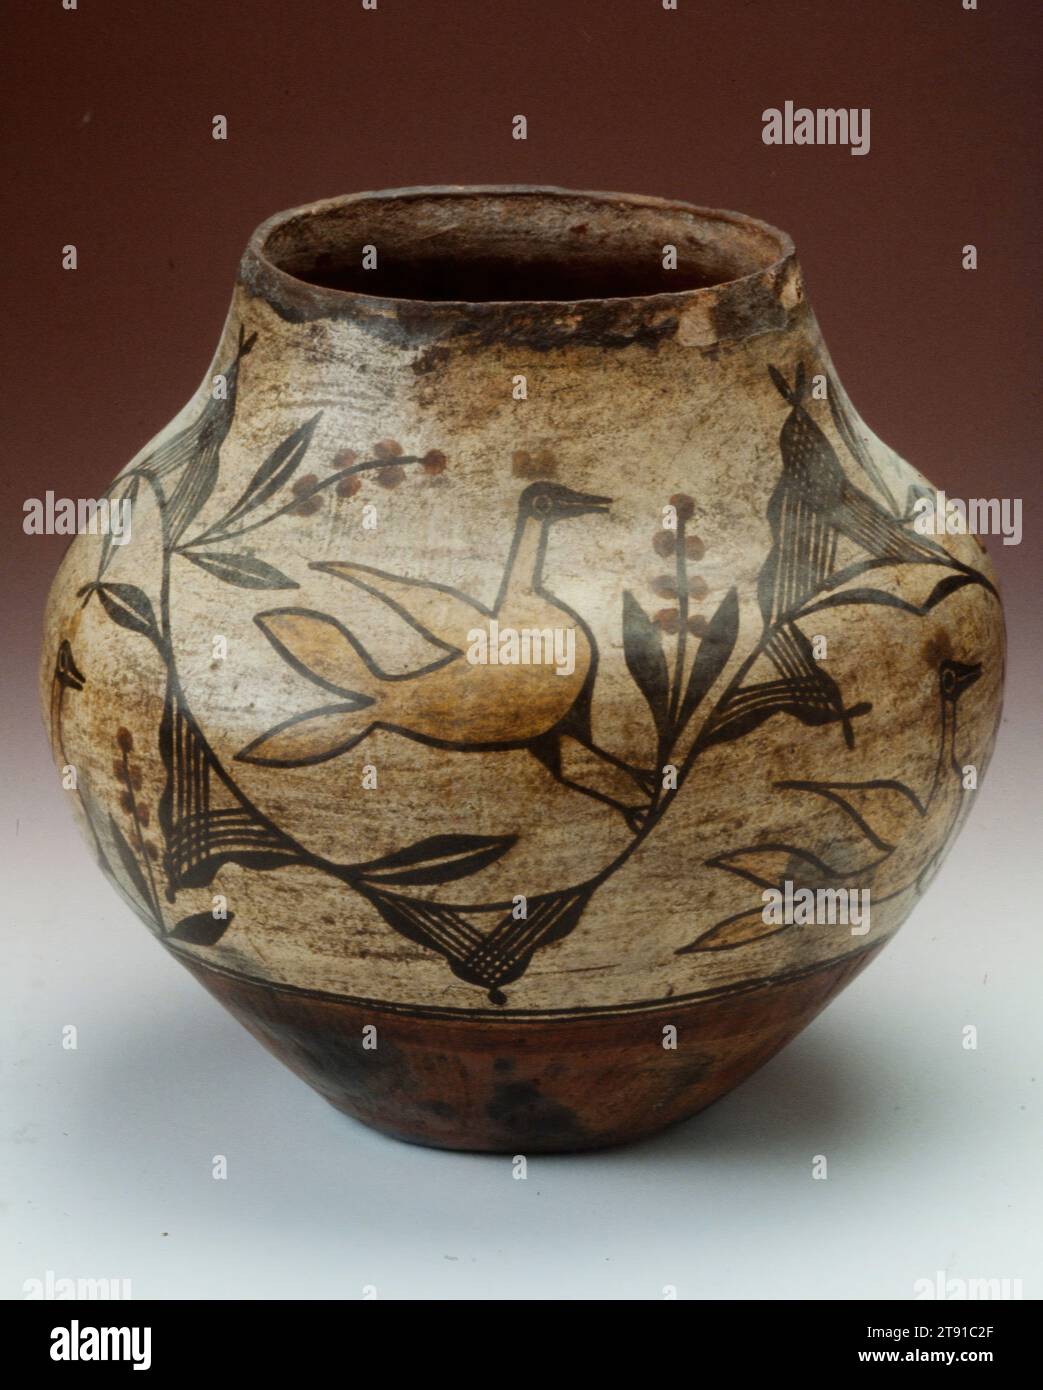 Vessel, 1910, 10 3/4 x 11 1/2 in. (27.31 x 29.21 cm), Ceramic, pigment, United States, 20th century, Zia artists often paint their beautiful ceramics with themes taken from the world around them, and have done so for centuries. Bird and feather imagery appears frequently on their hand-built vessels, usually accompanied by foliage, flowers and sometimes berries. The birds on this pot are modeled after roadrunners, an animal native to the Zia Pueblo area. Roadrunners are usually colored red by Zia artists, so these are especially striking for being yellow, which was an individual design choice Stock Photo